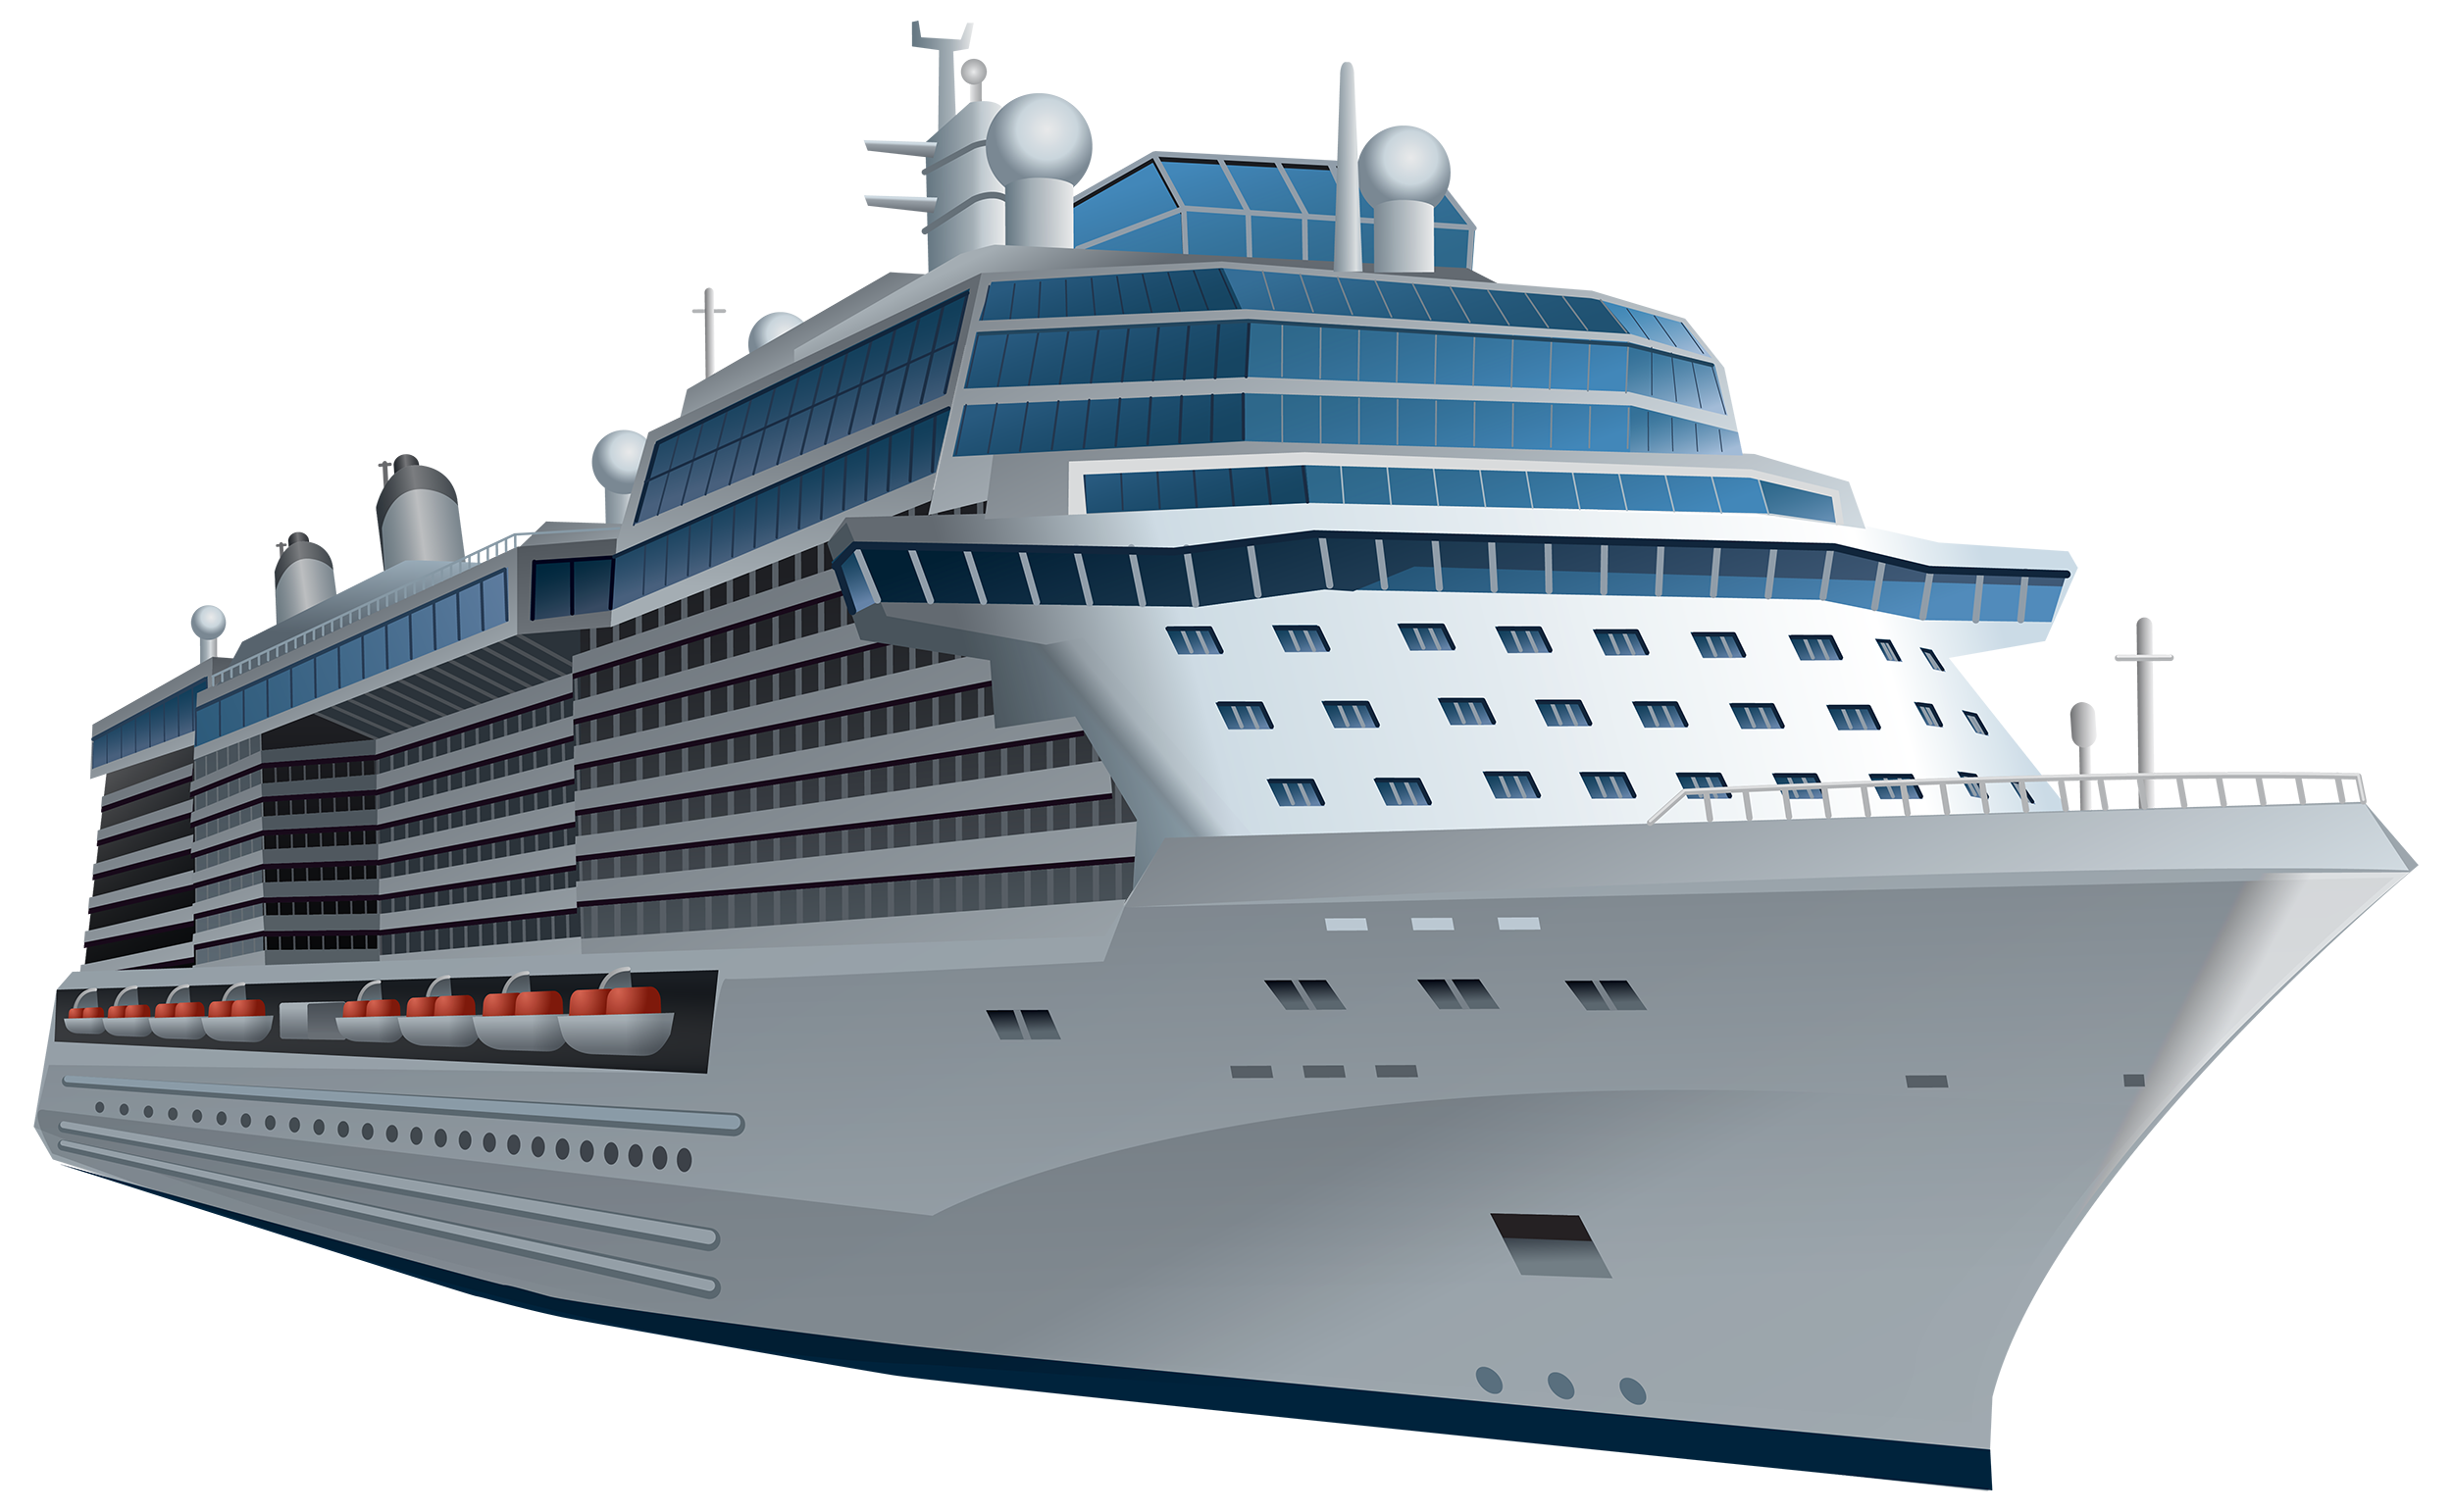 Traveling clipart passenger. White cruise ship png